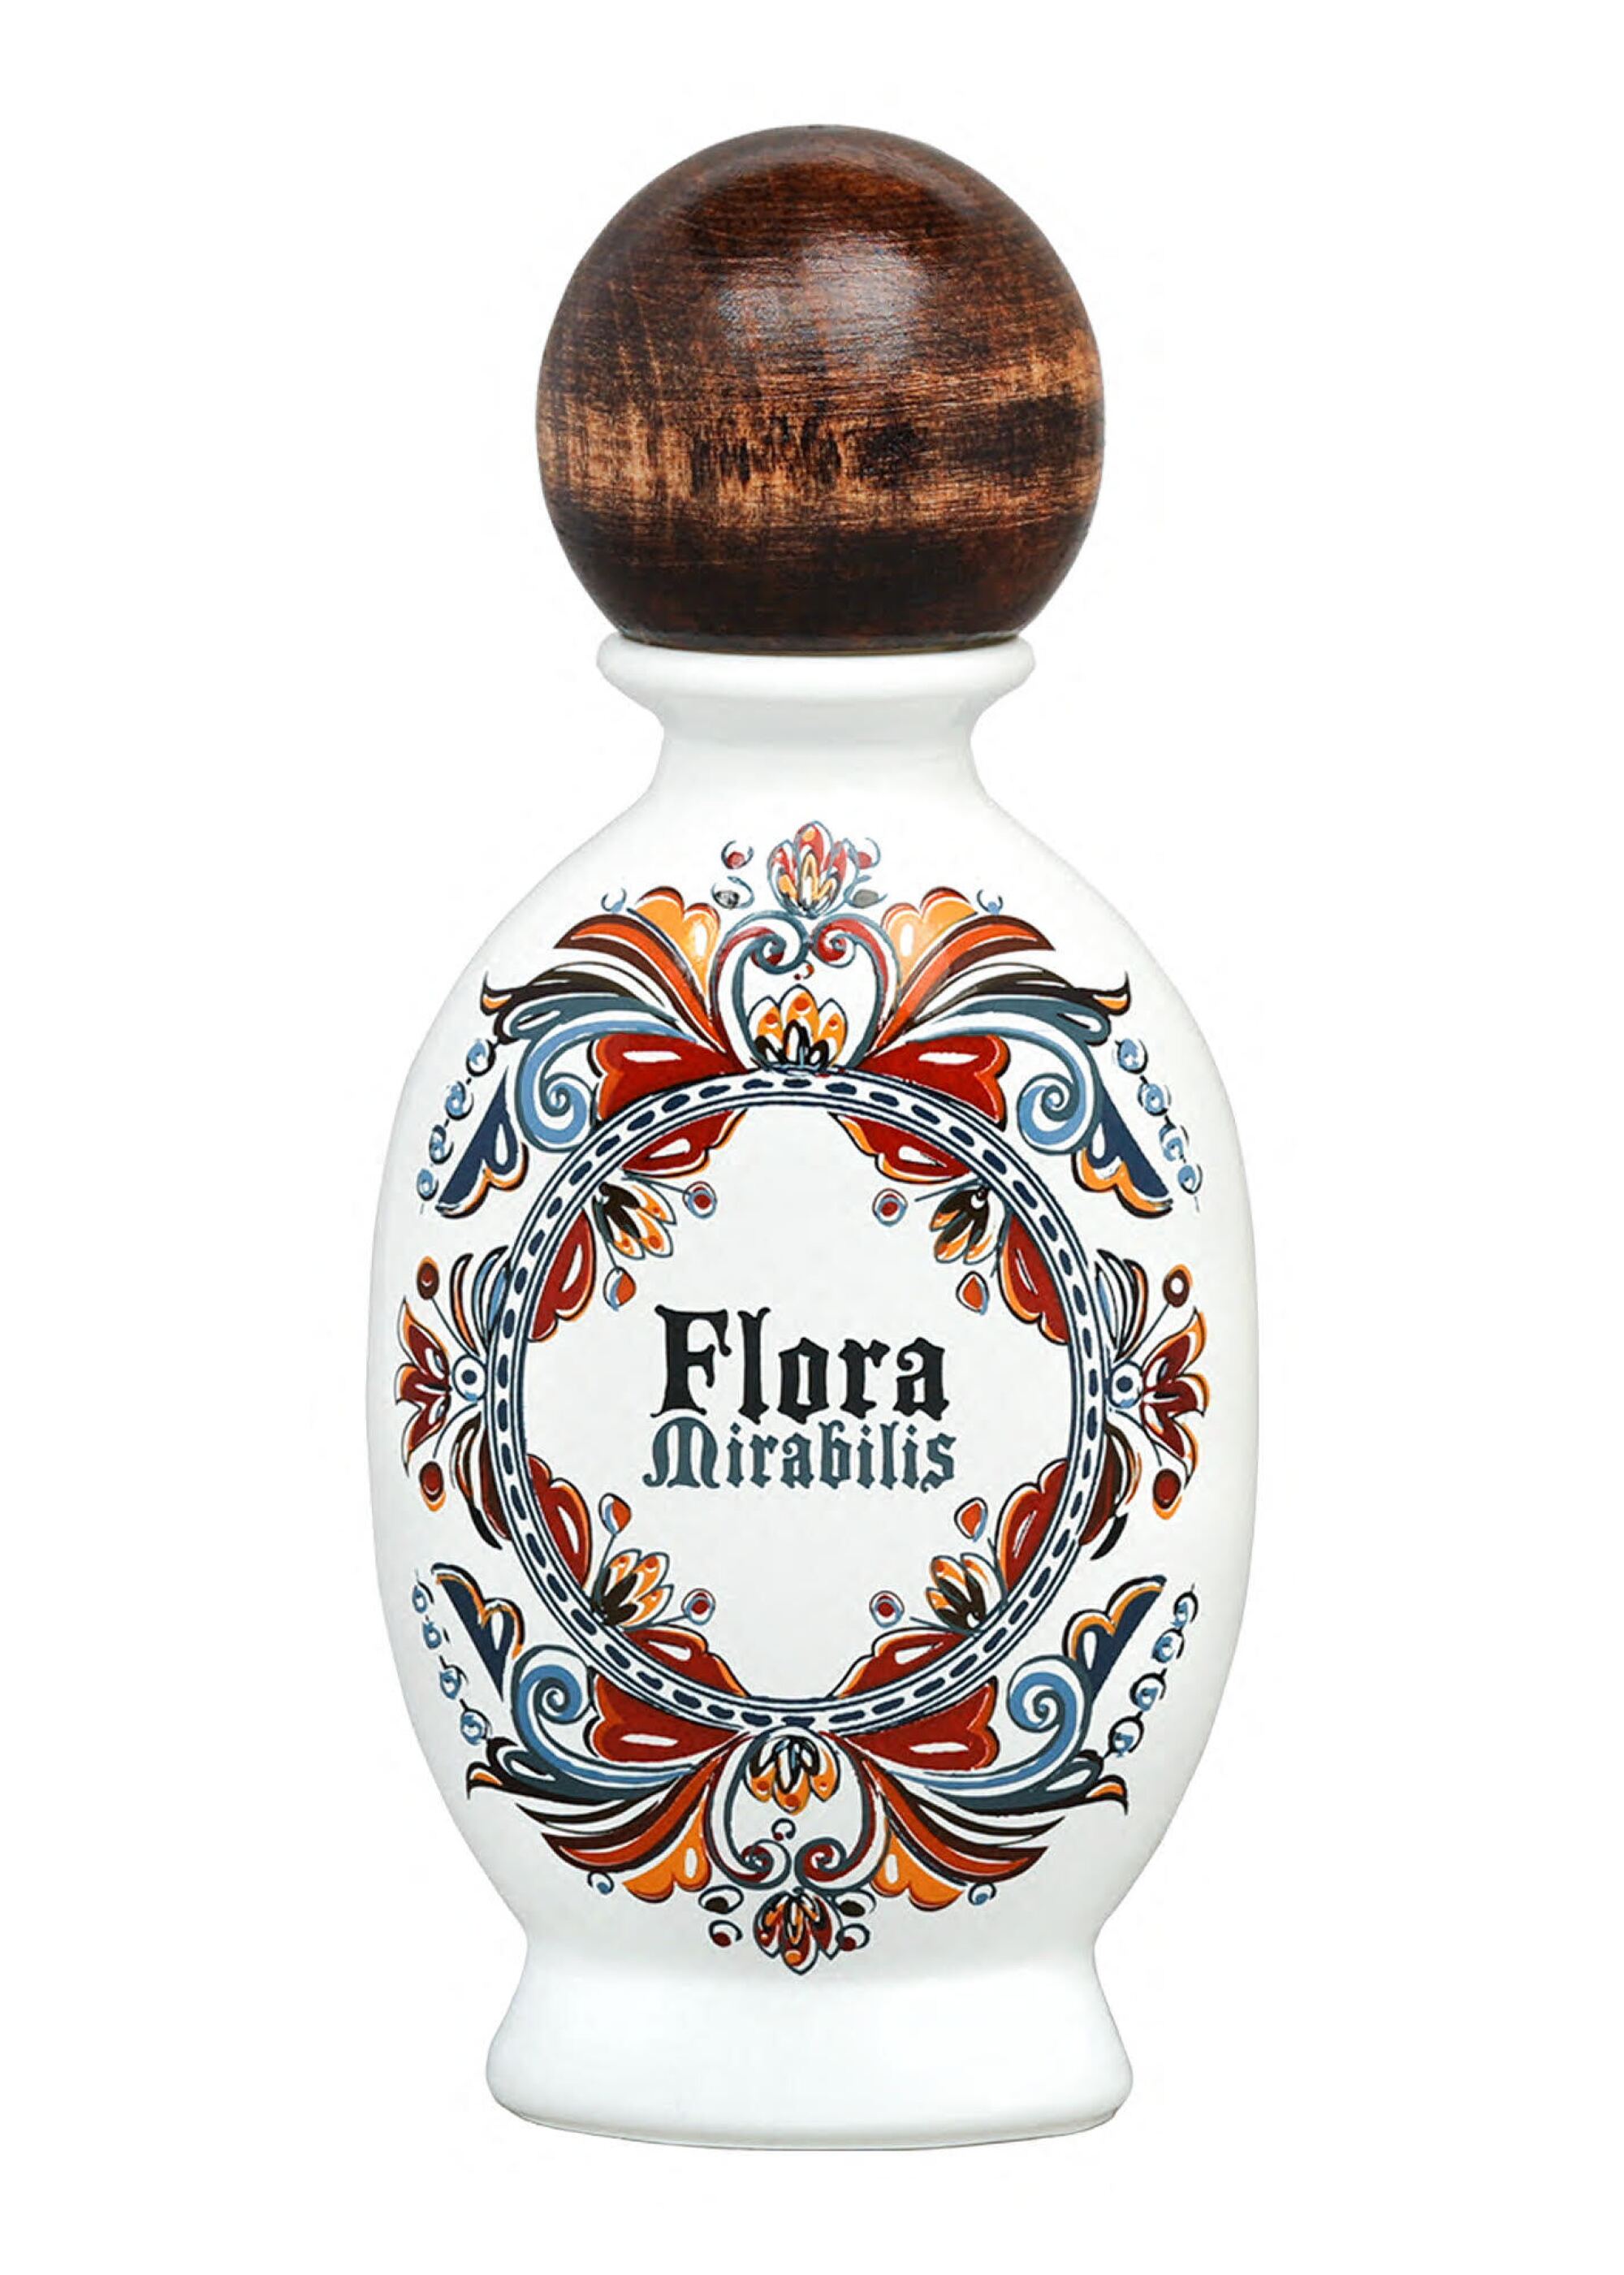 A white bottle with a round wooden cap and a floral design around the words "Flora Mirabilis"